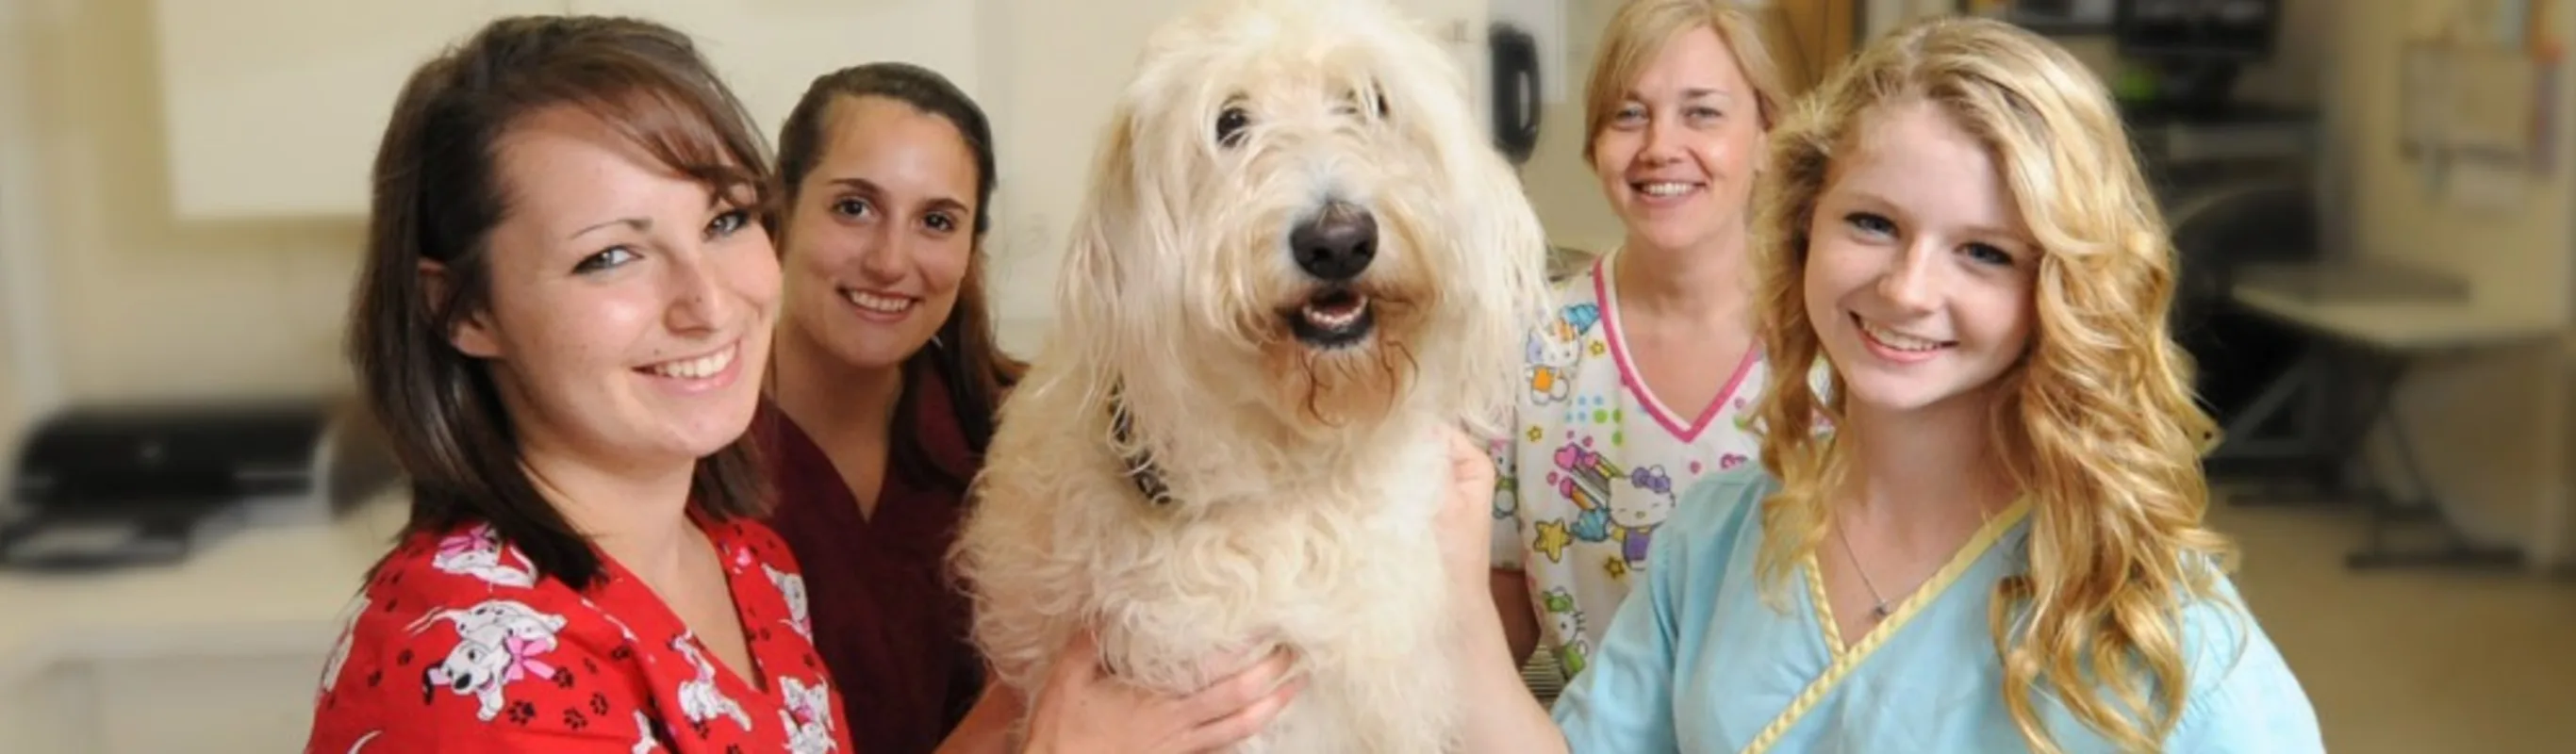 four staff members pose around a fluffy dog and smile at the camera